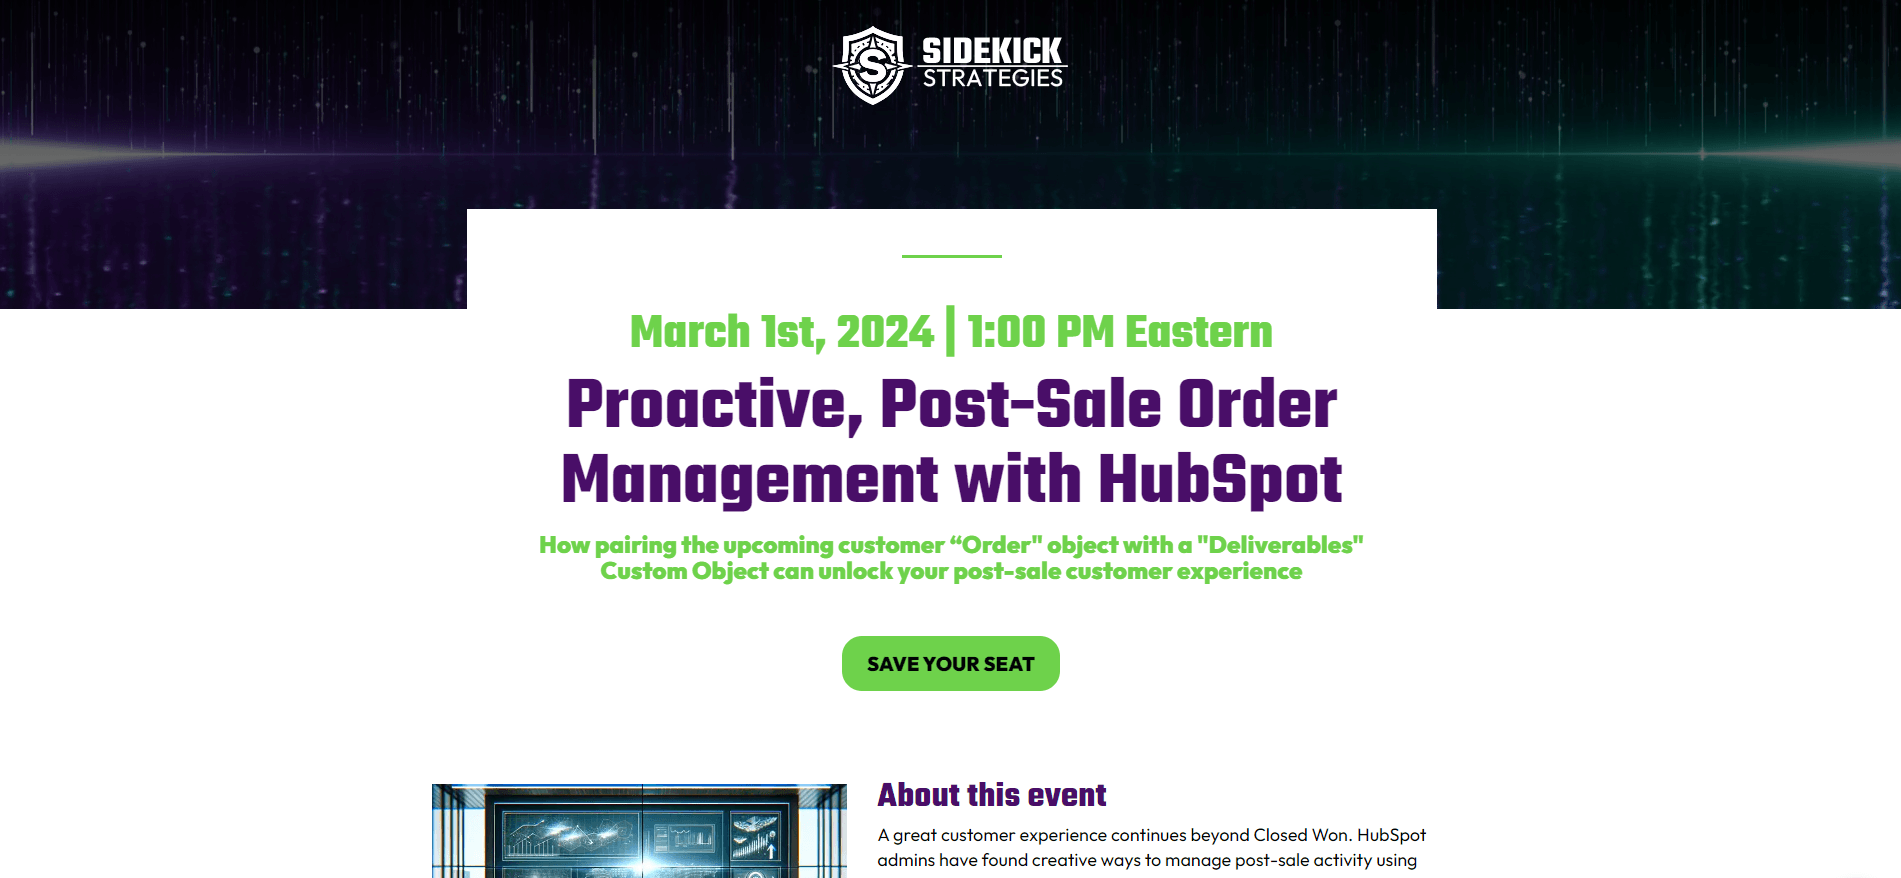 Proactive, Post-Sale Order Management with HubSpot - EVENT